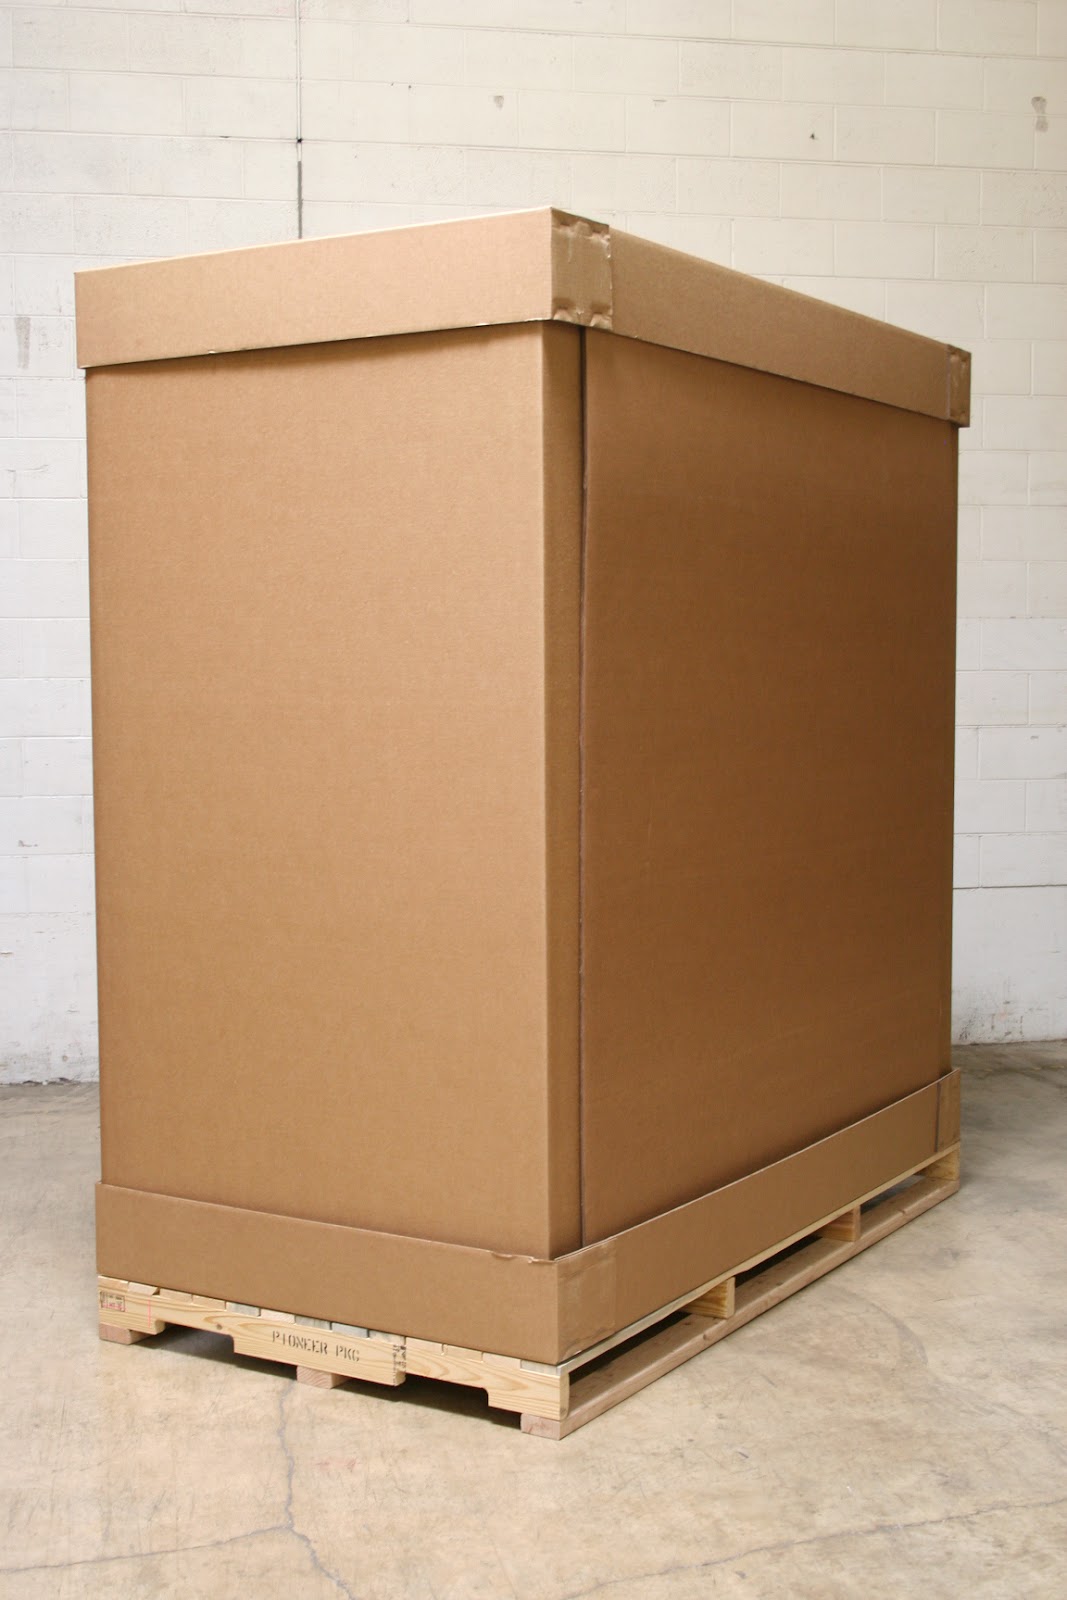 OX BOX: Triple-wall Corrugated Large Moving Crate Boxes